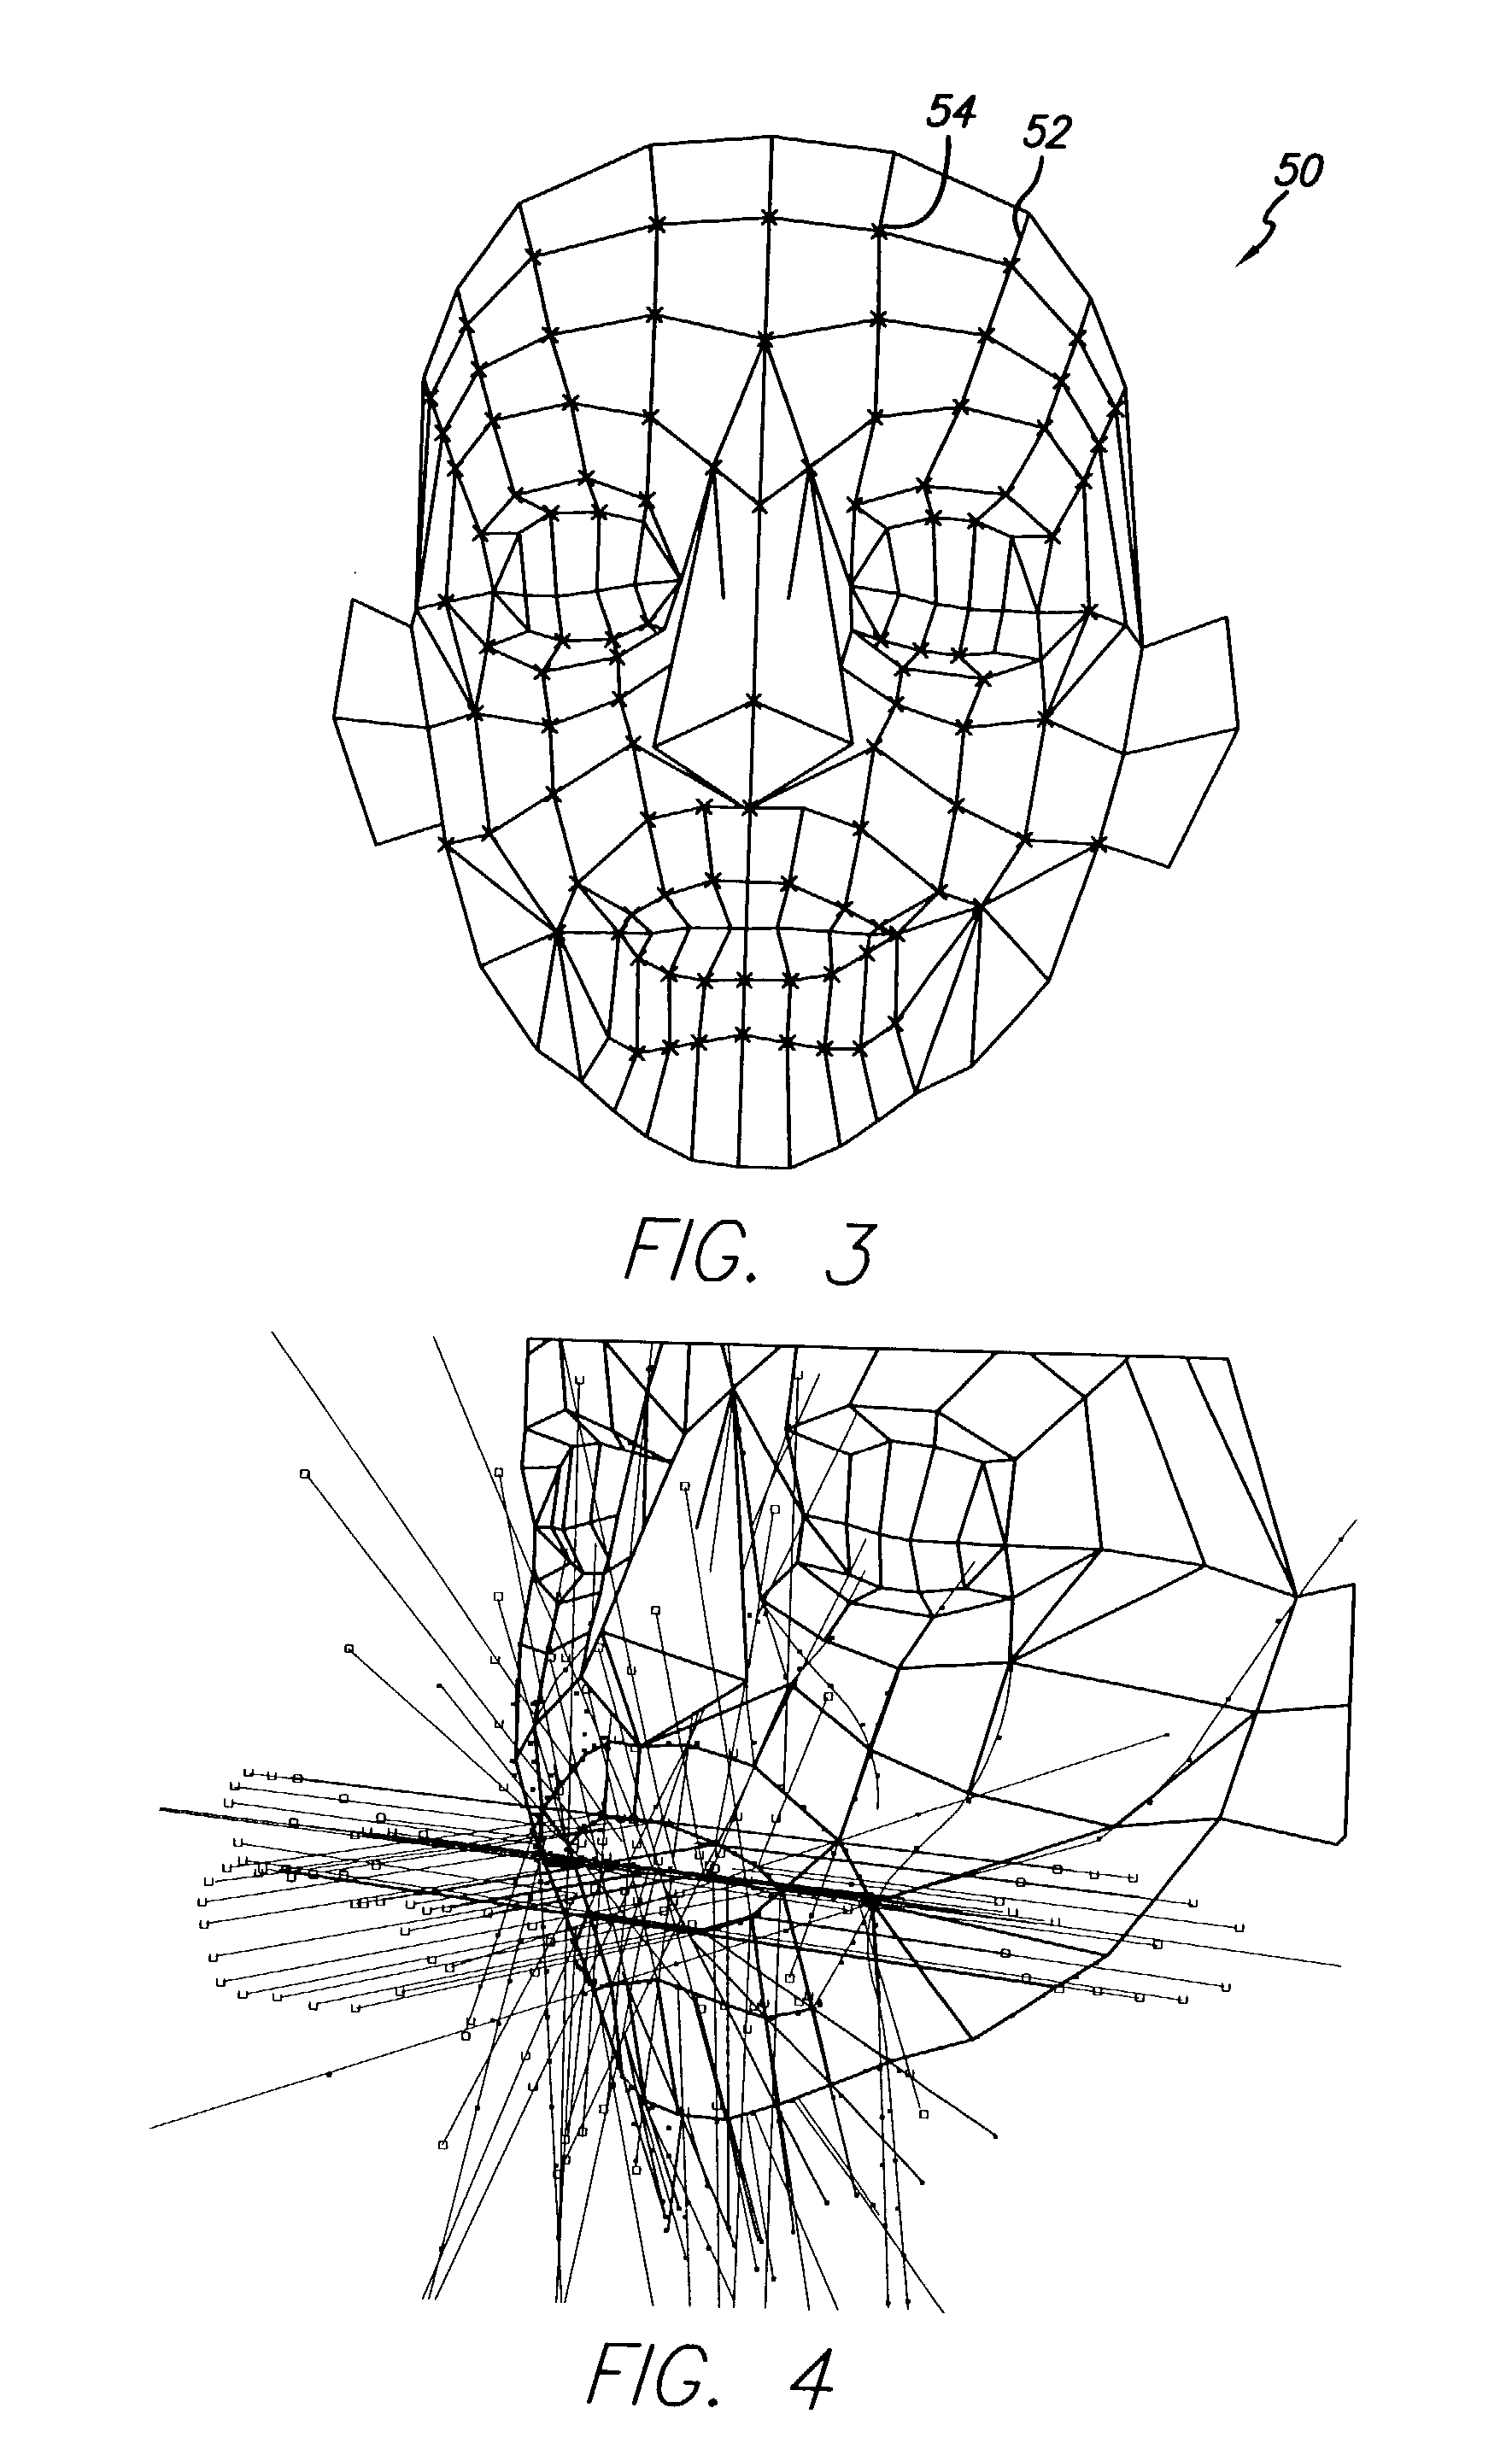 System and method for animating a digital facial model